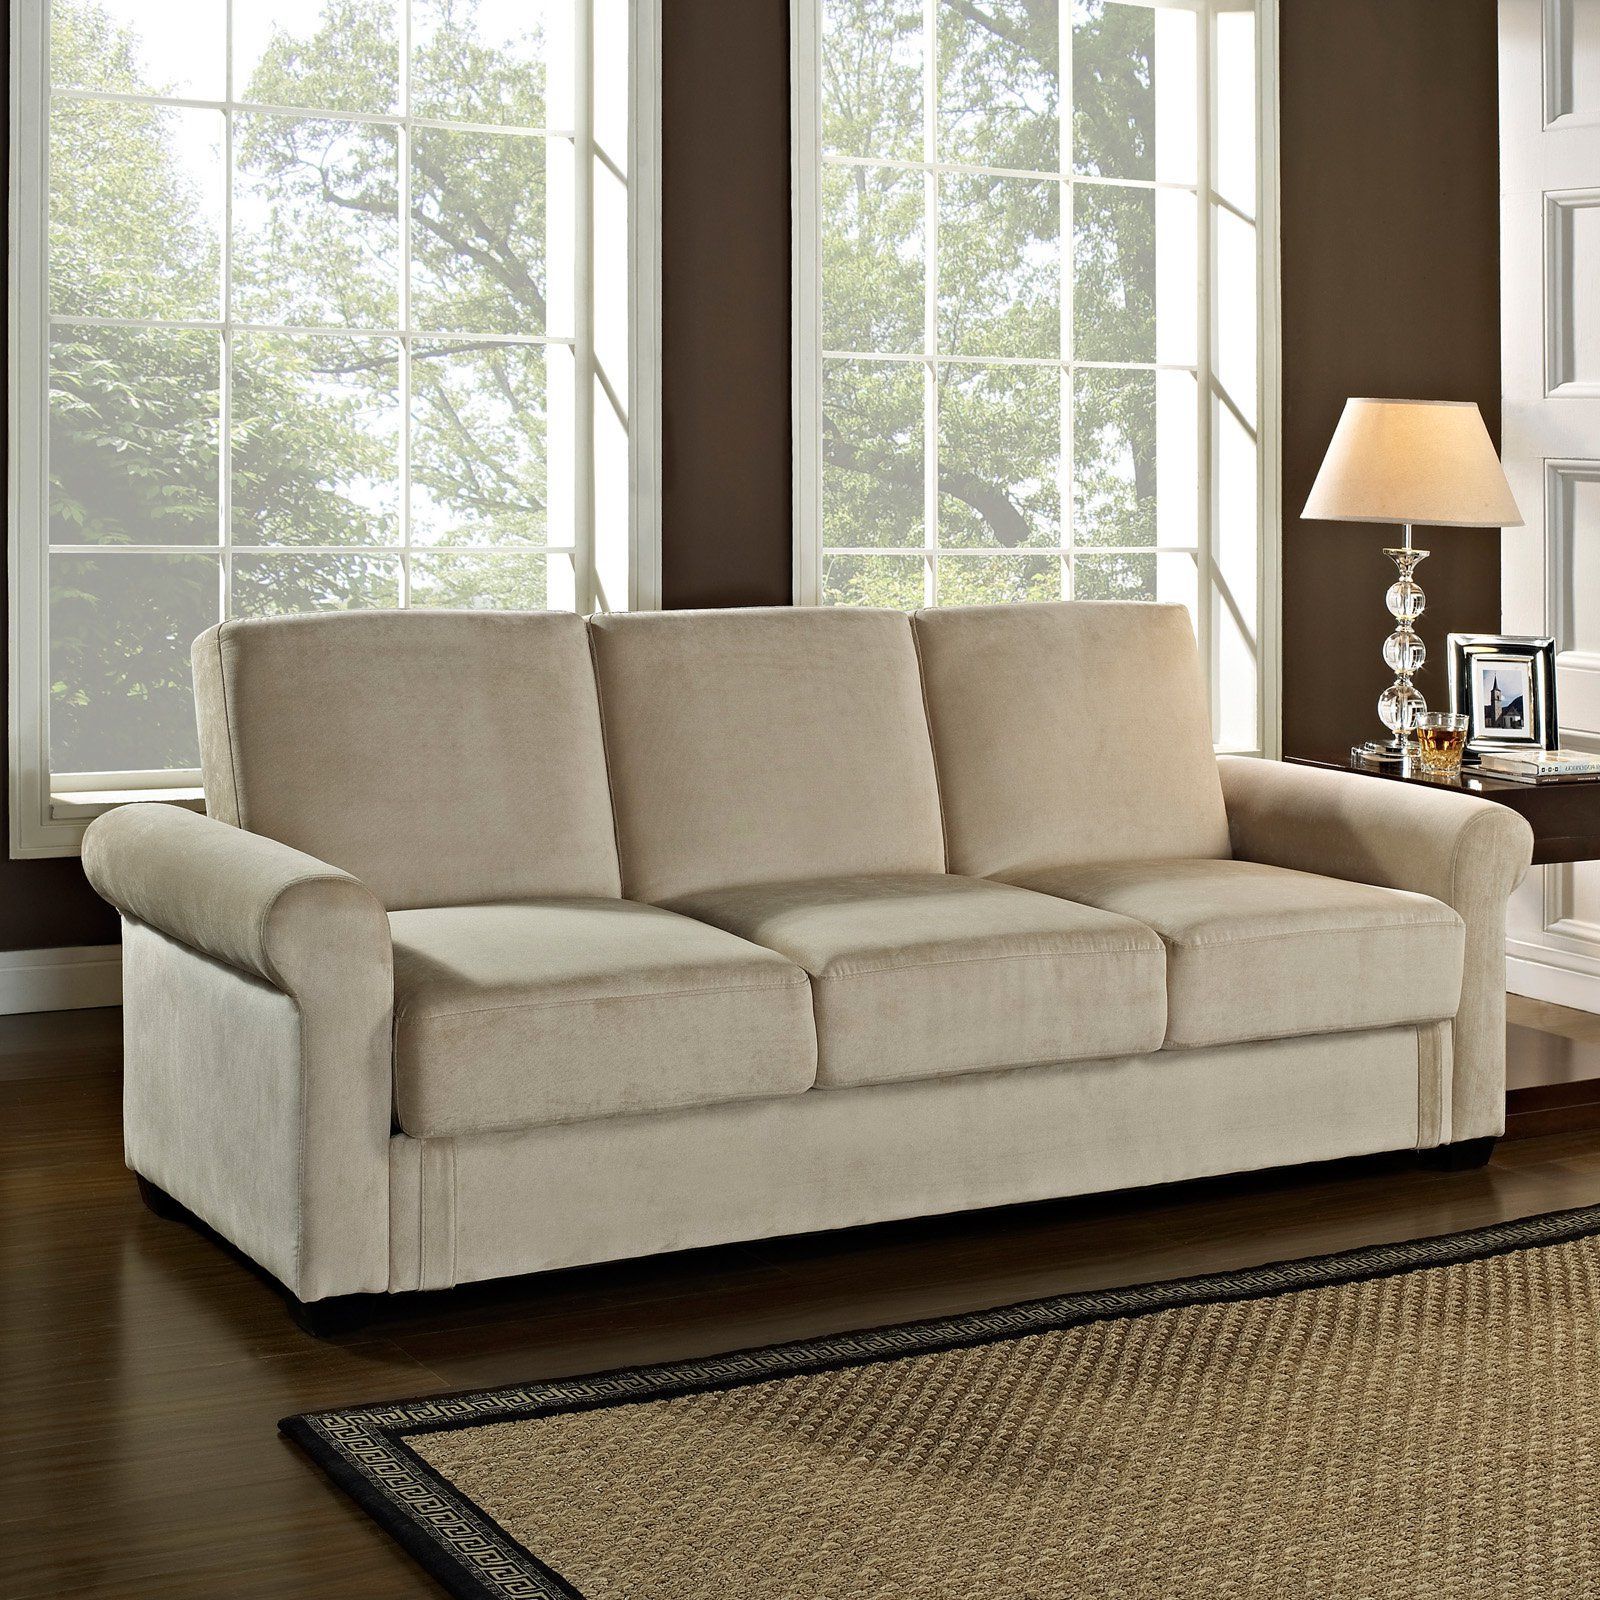 Most Popular Have To Have It. Serta Dream Convertible Thomas Sofa – Light Brown With Regard To 8 Seat Convertible Sofas (Photo 2 of 15)